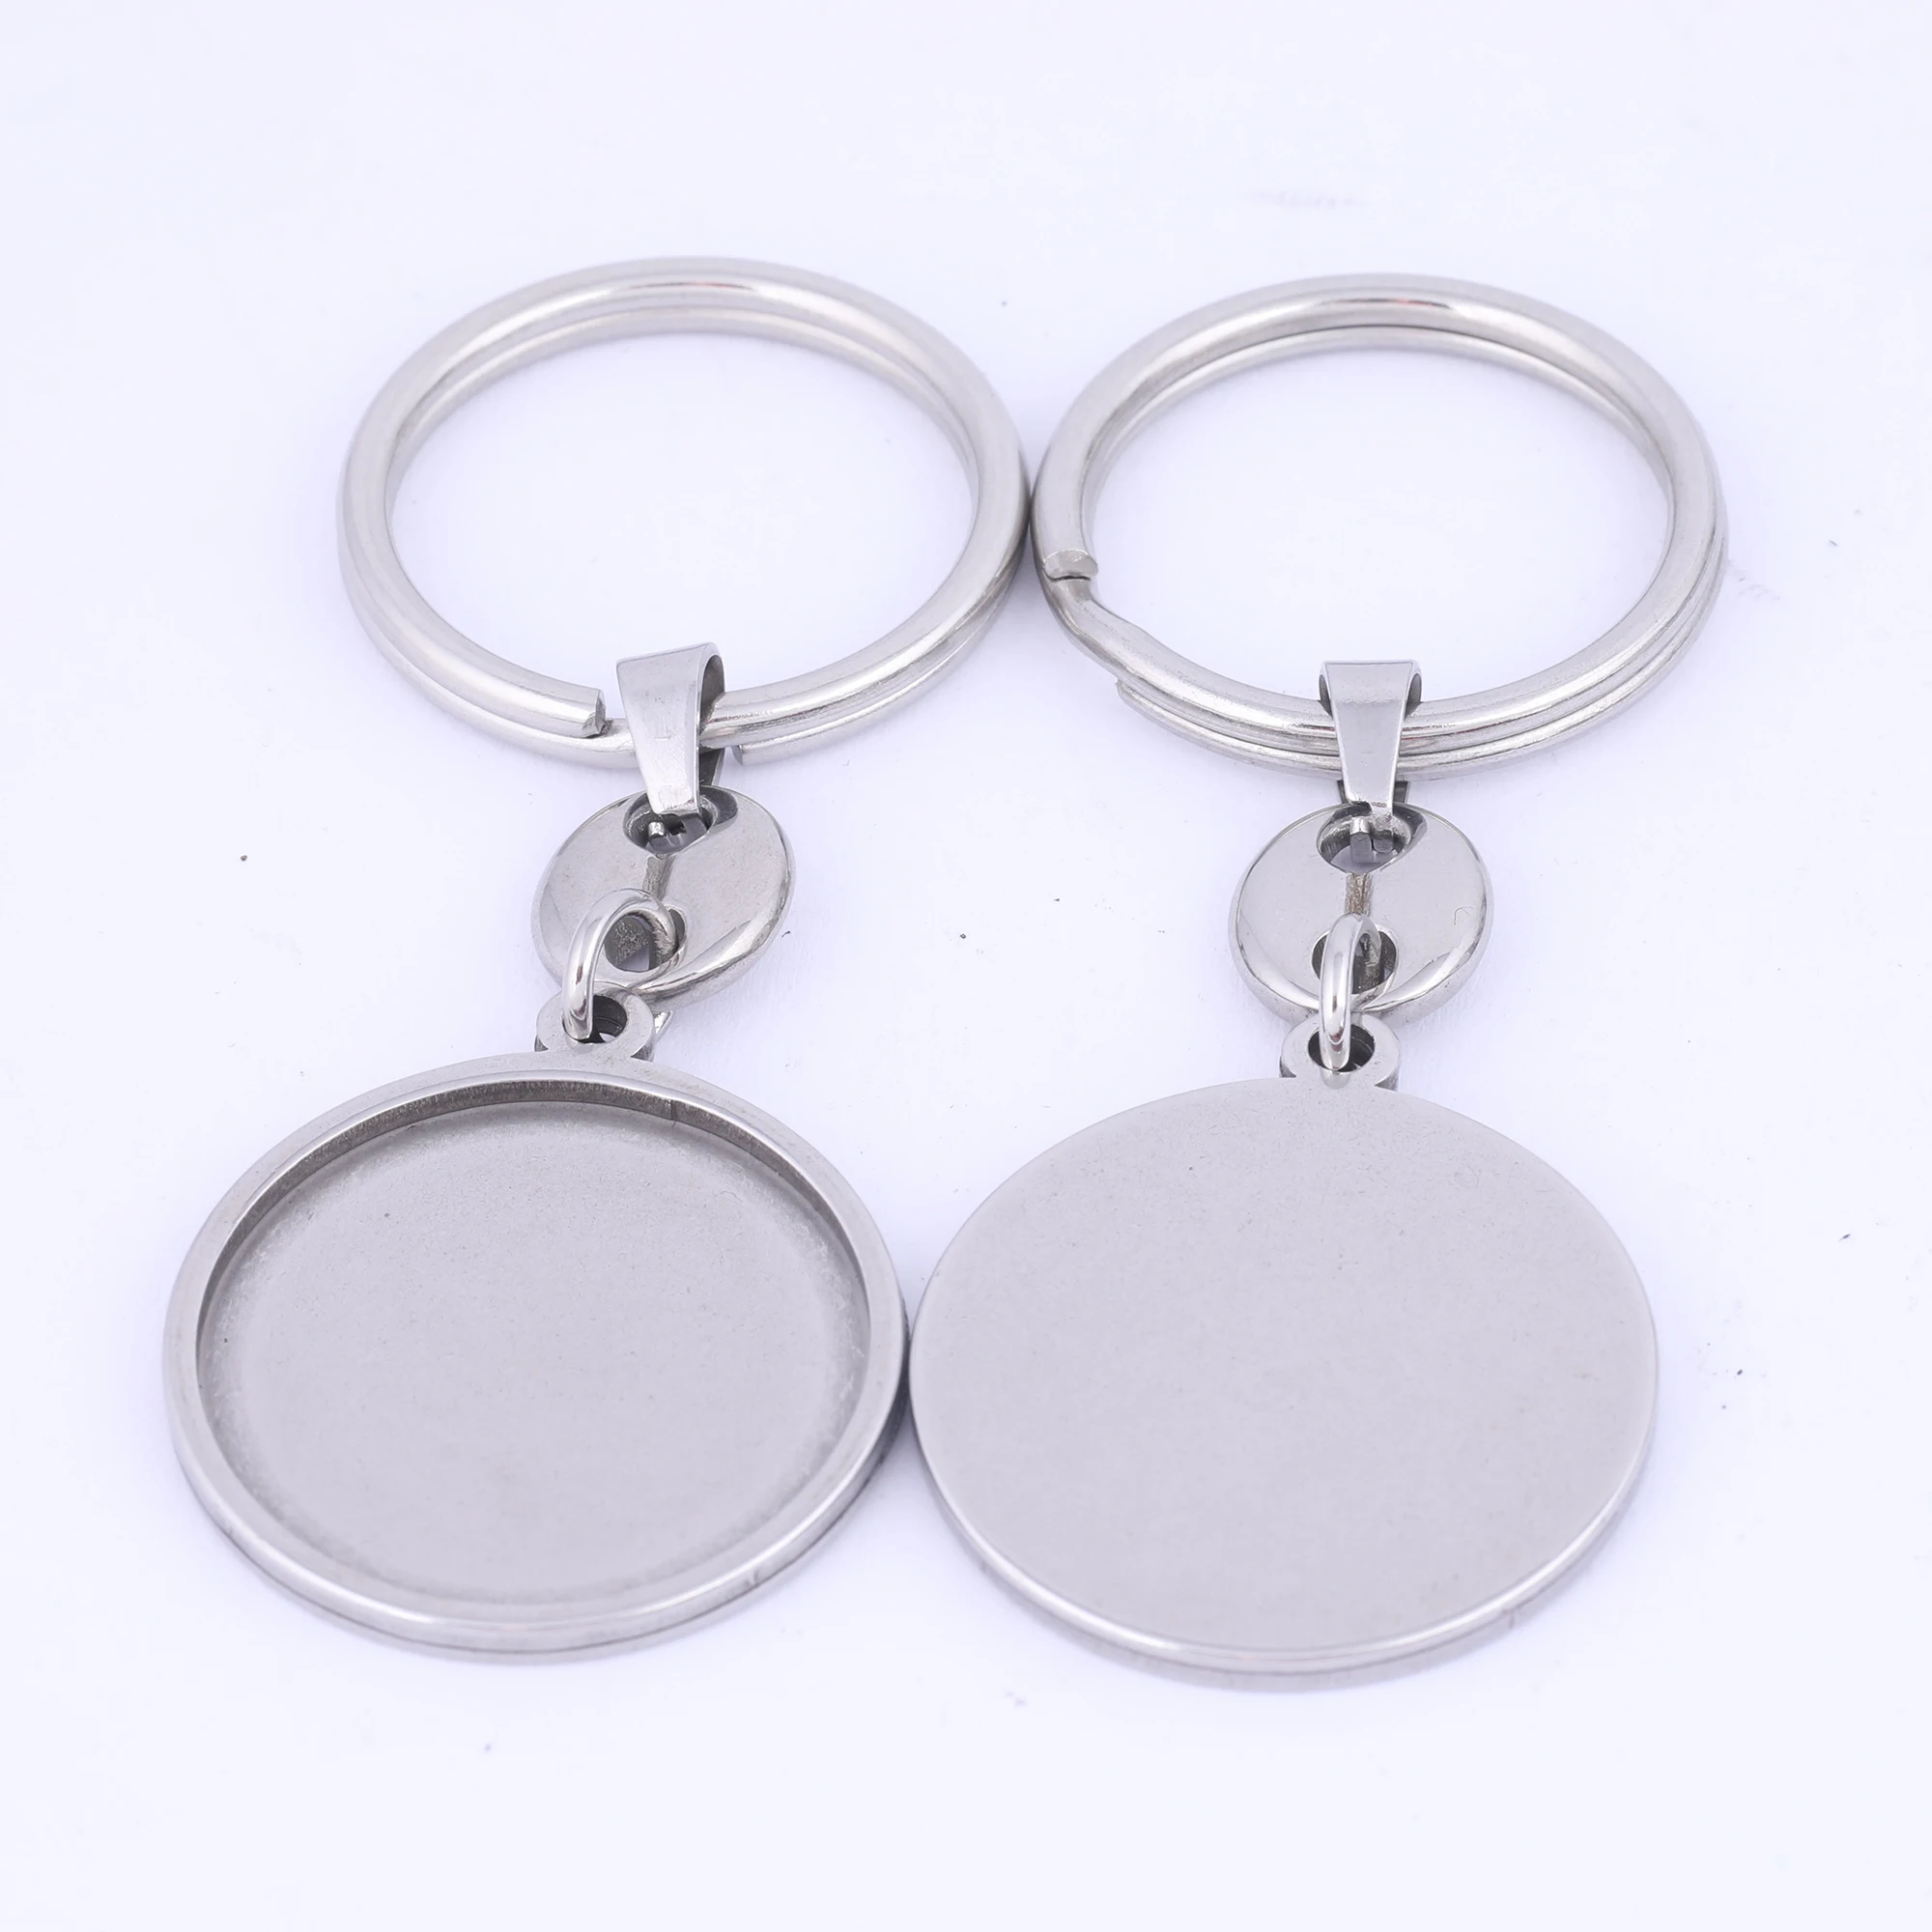 

2pcs Stainless Steel 25mm Cabochon Keychain Base Setting Trays Metal Keyring Components Diy Key Chain Making Supplies